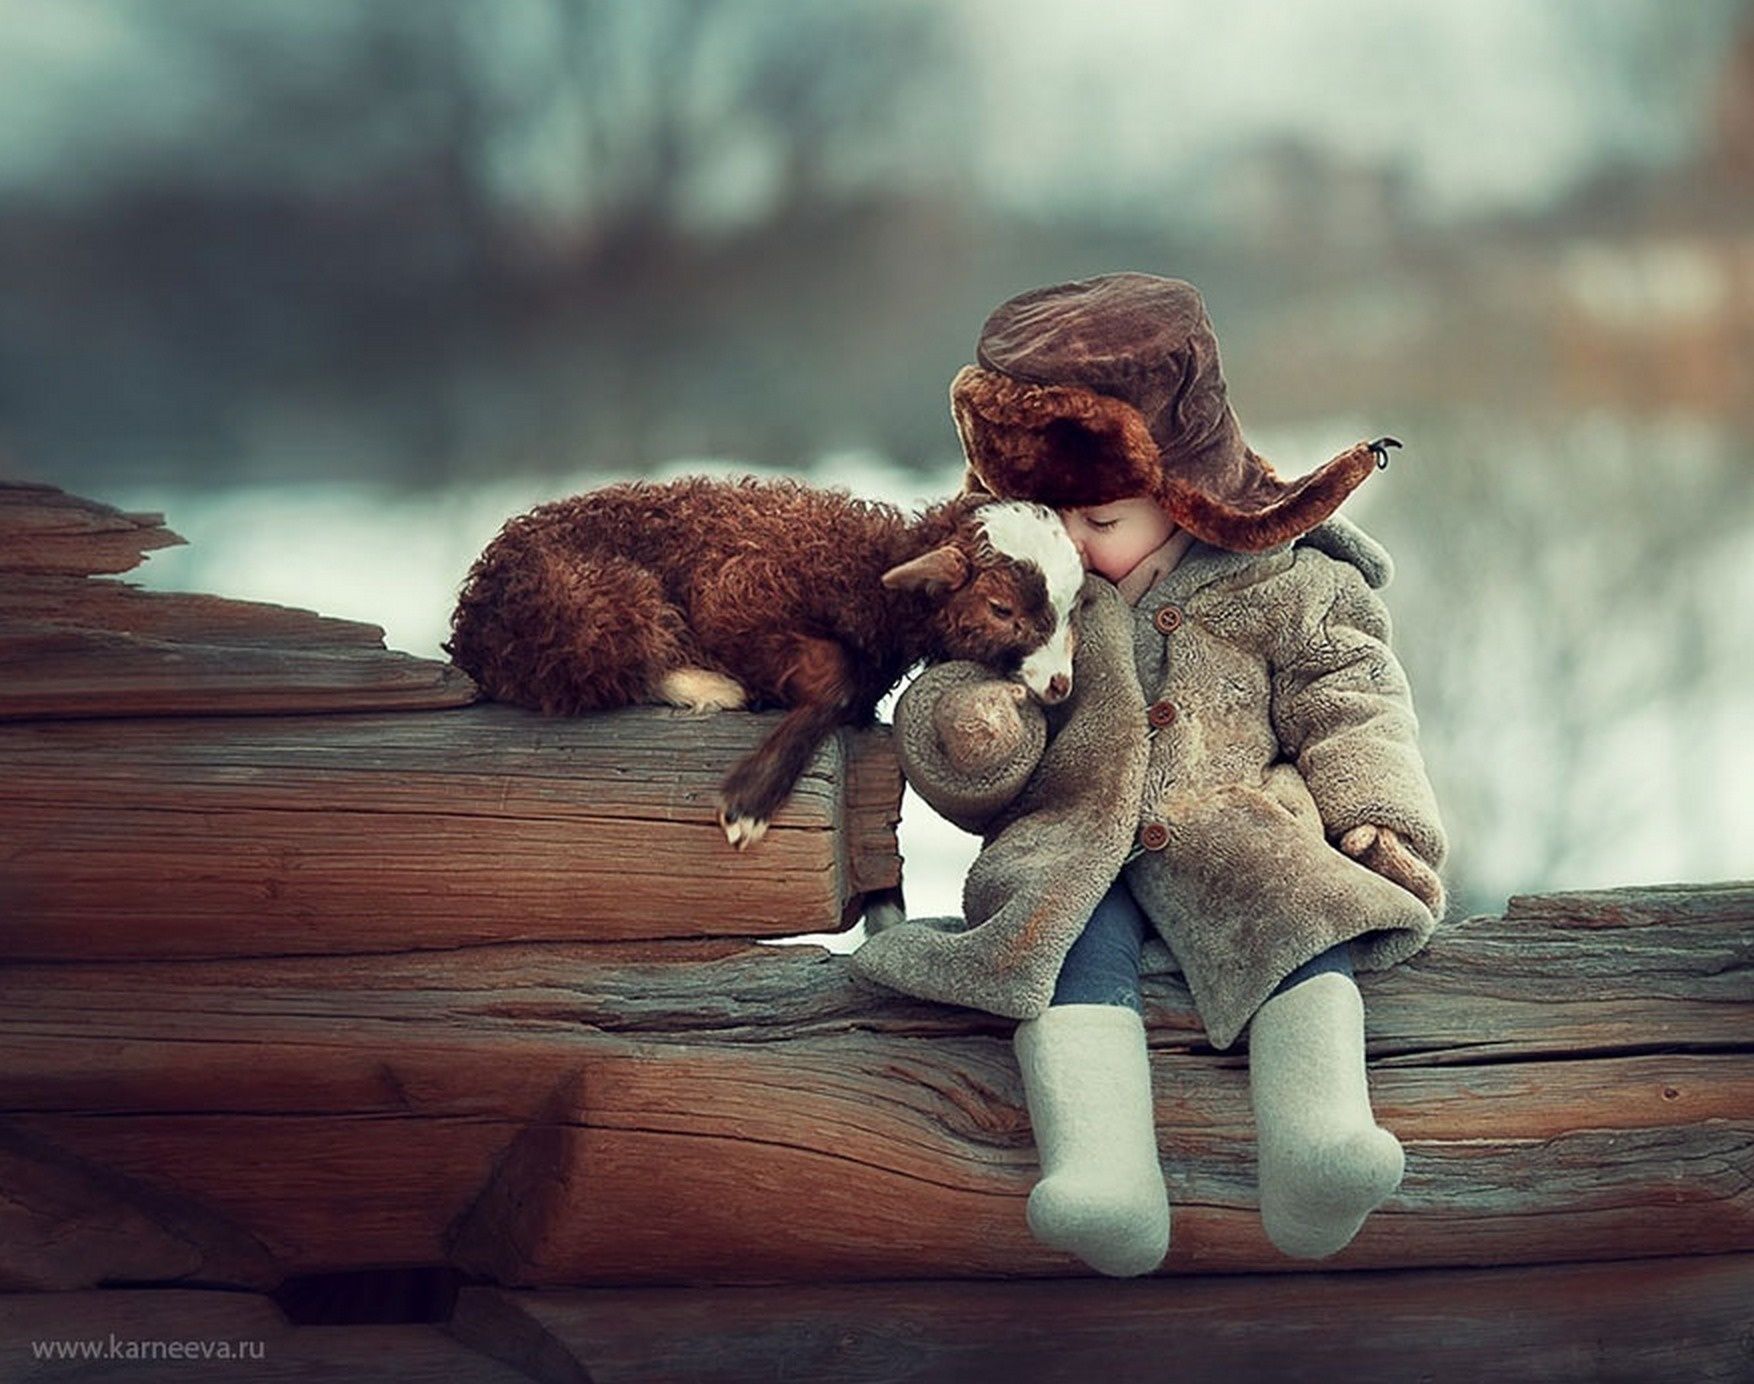 She Captures The Perfect Moment Between Children And REAL Animals ...